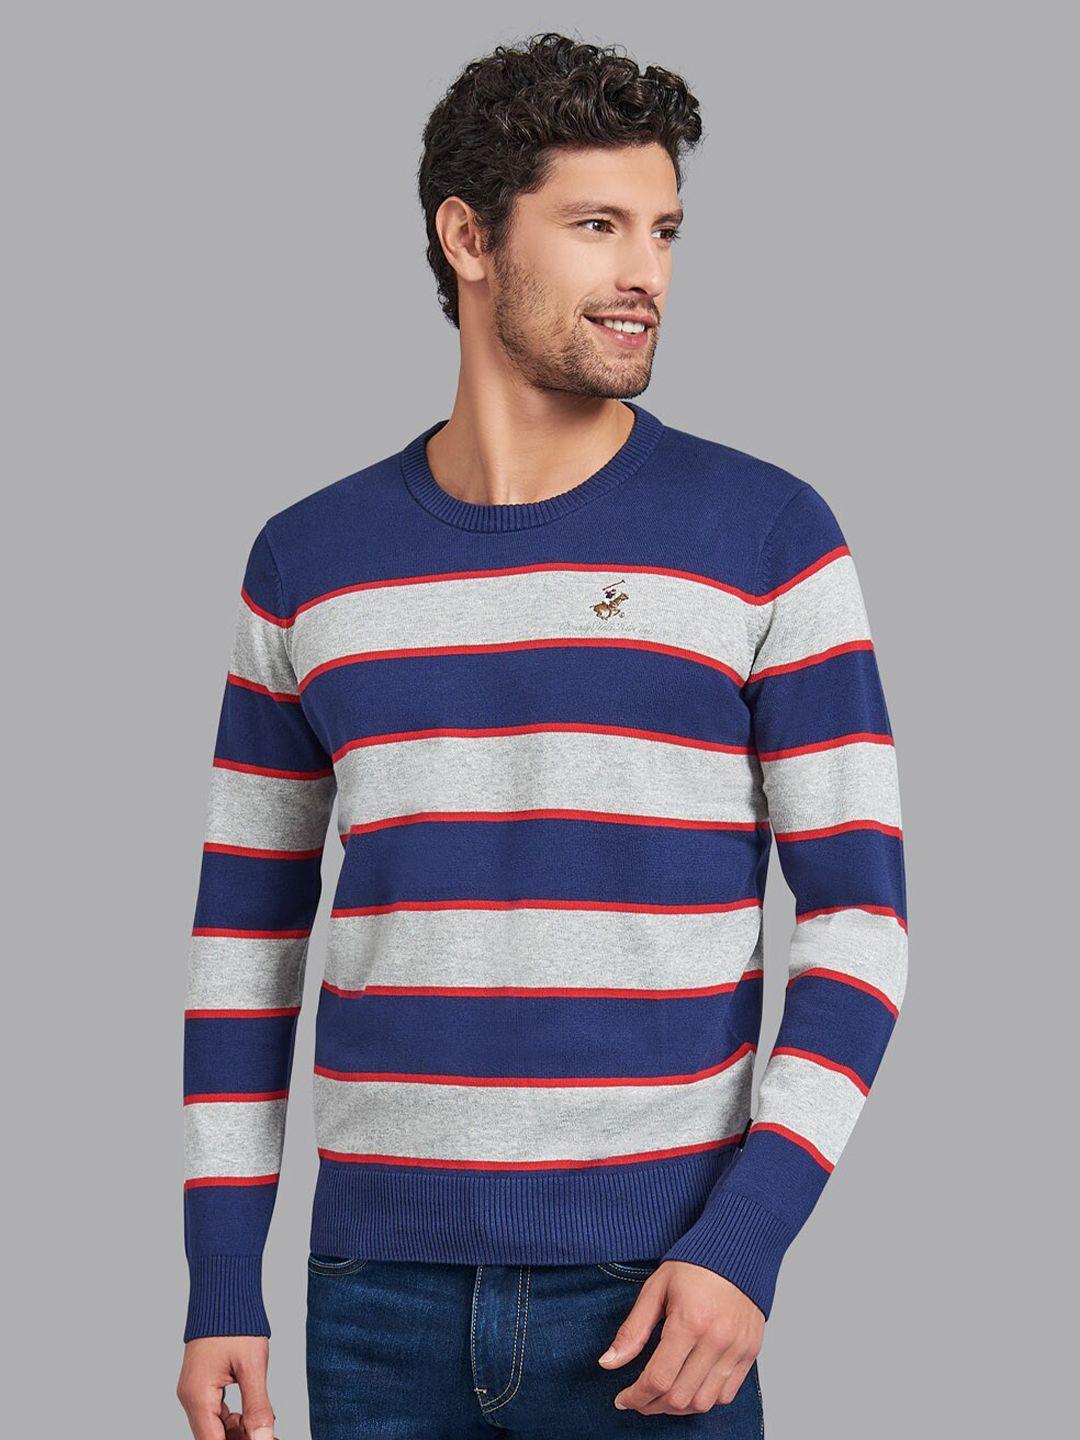 Beverly Hills Polo Club Men Navy Blue & Grey Striped Pullover